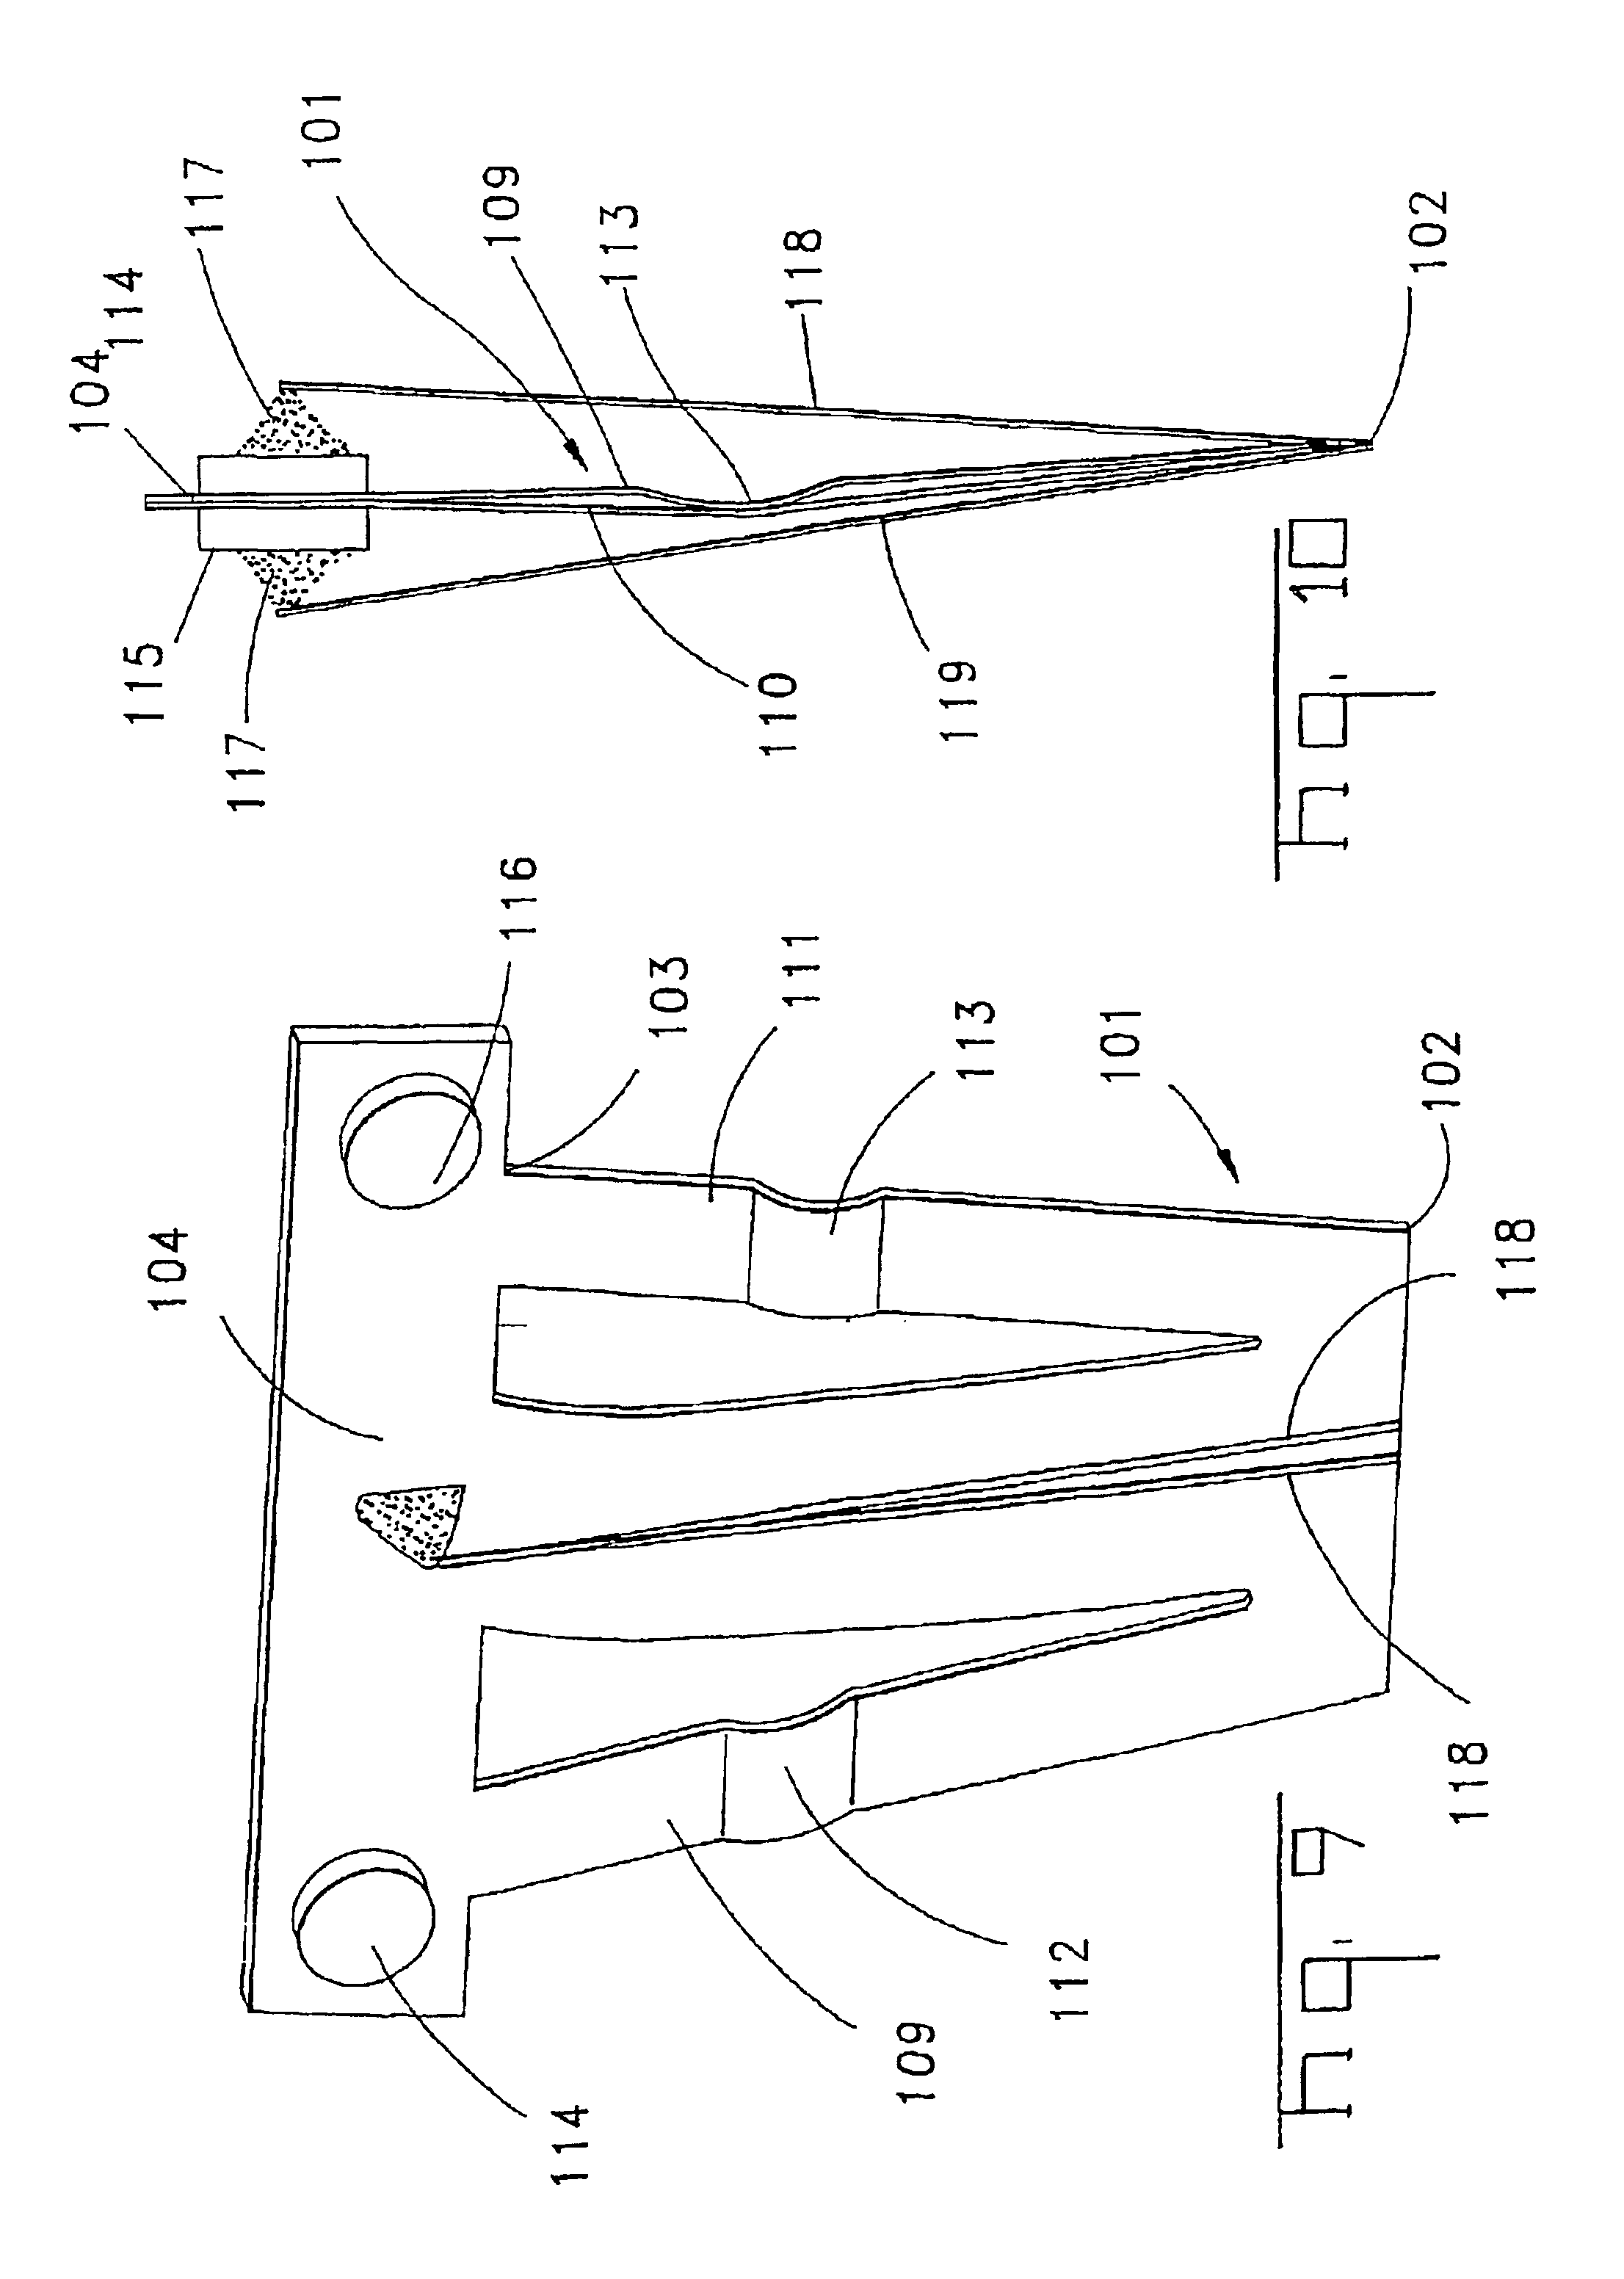 Bistable electric switch and relay with a bi-stable electrical switch